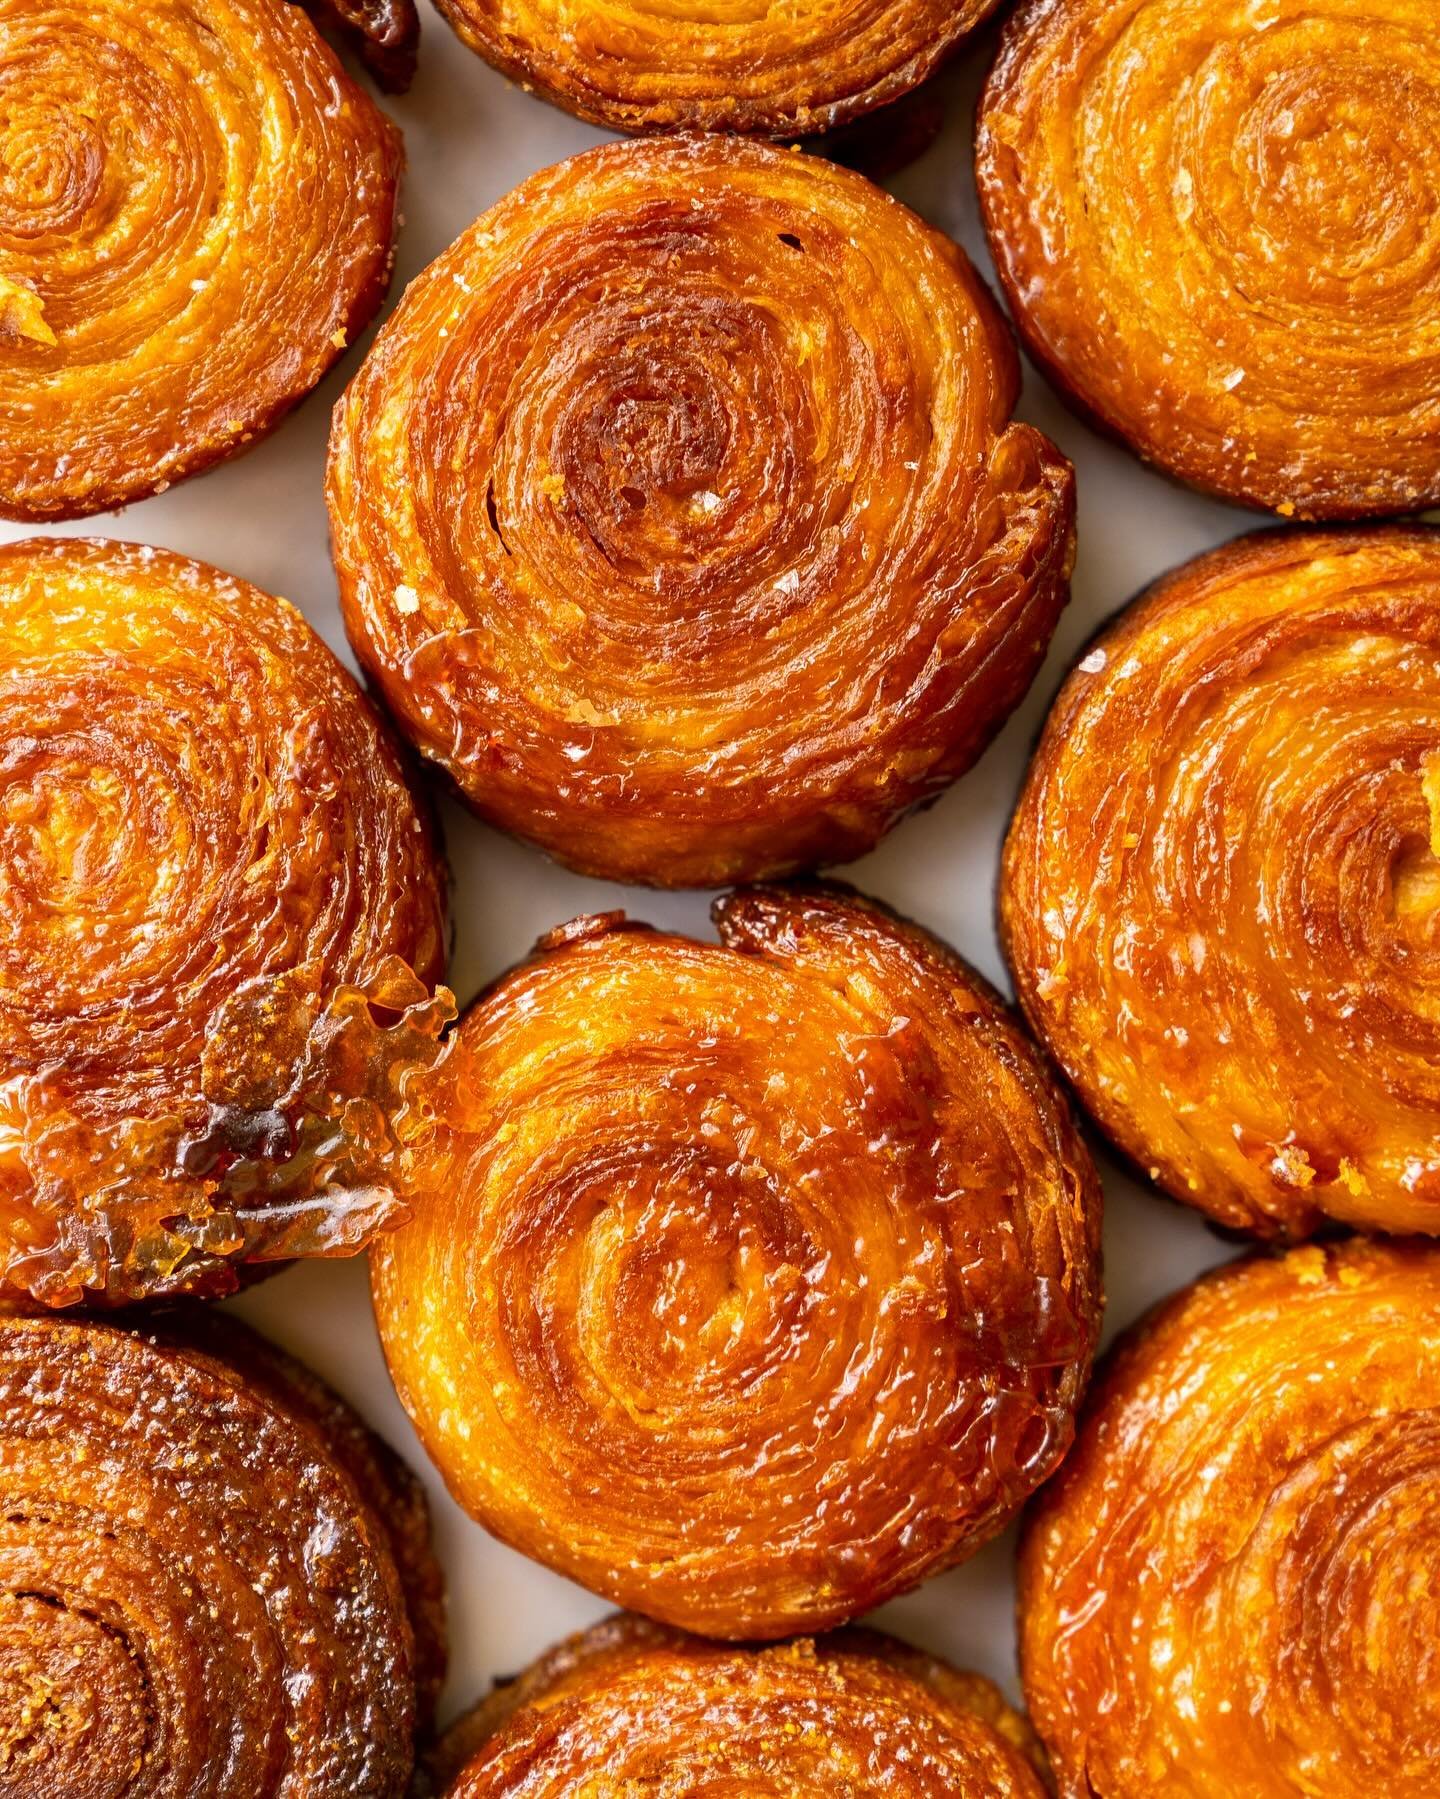 No matter how you pronounce it (and we&rsquo;ve heard many variations at the bakery), the kouign amann will always be one of our favourite pastries we serve. A traditional Breton cake with buttery, caramelized croissant layers and a touch of sea salt